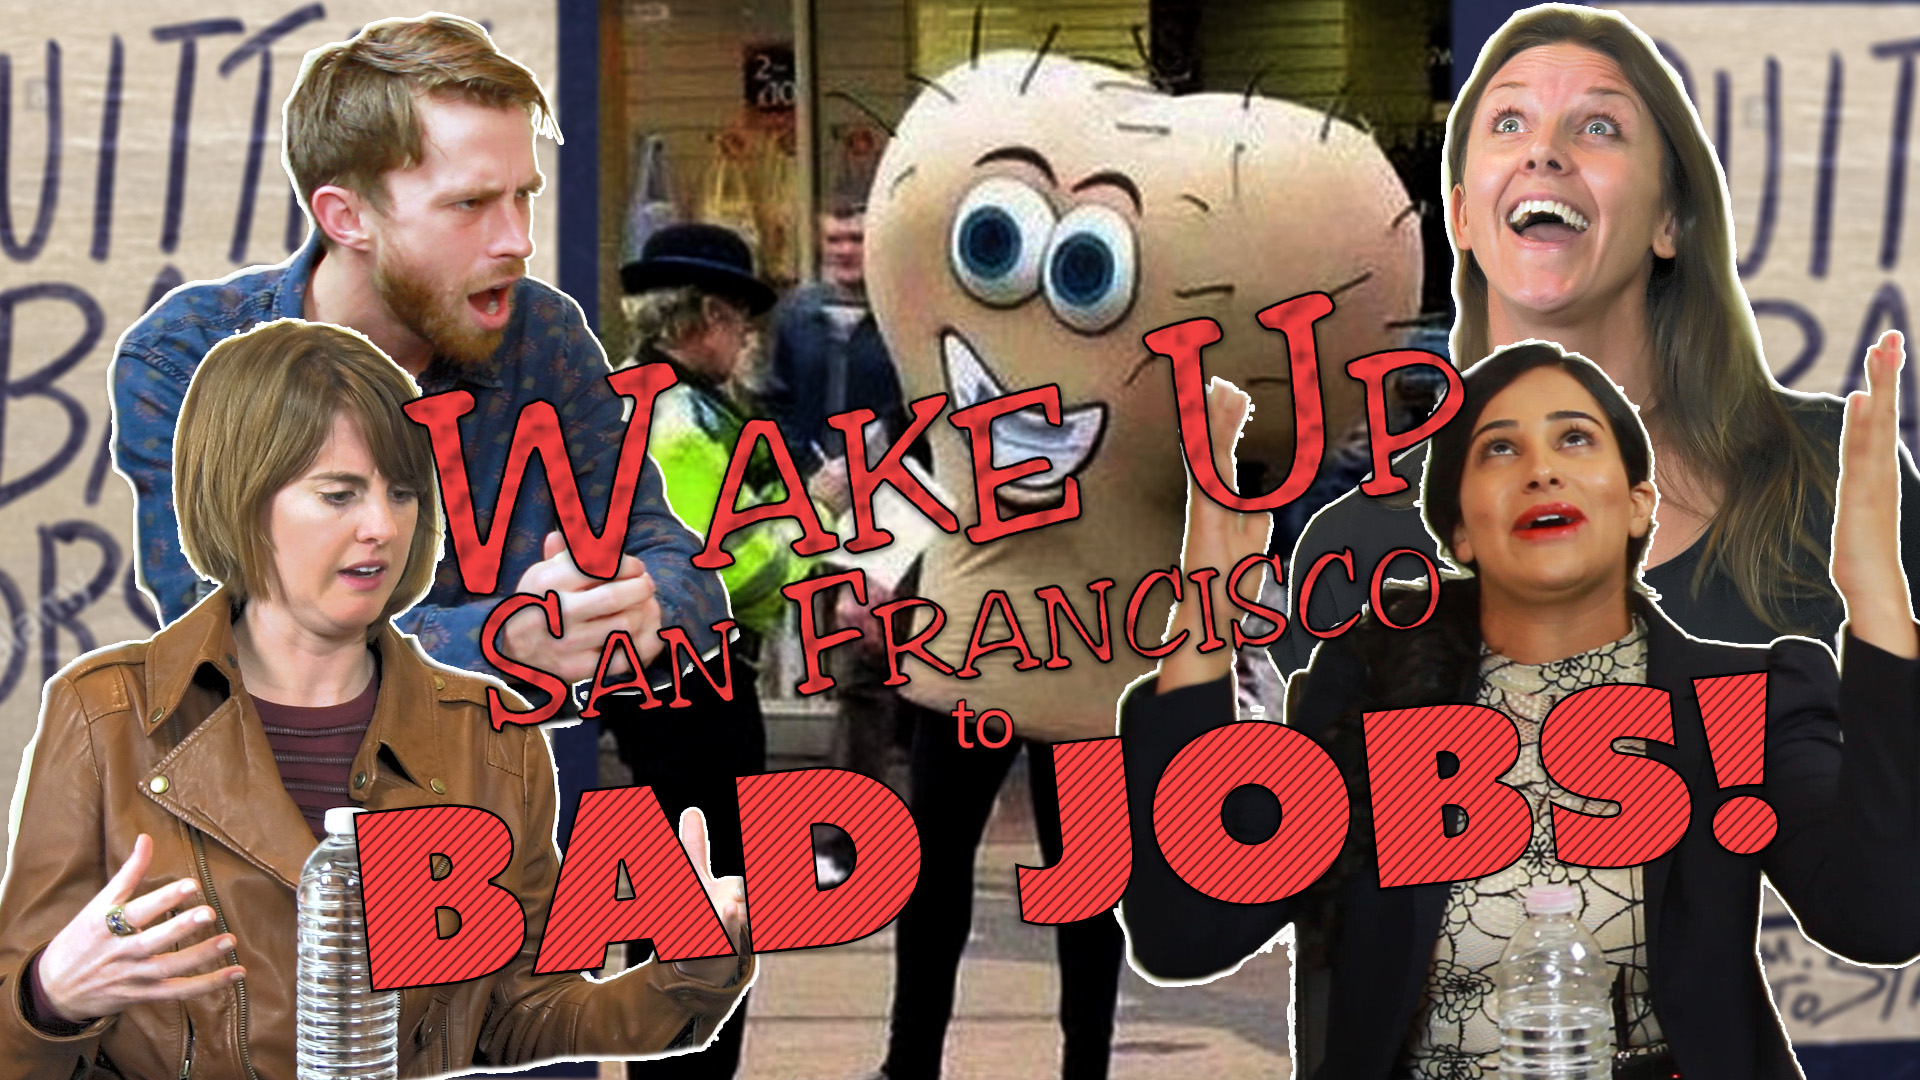 B*tching about our WORST JOBS!